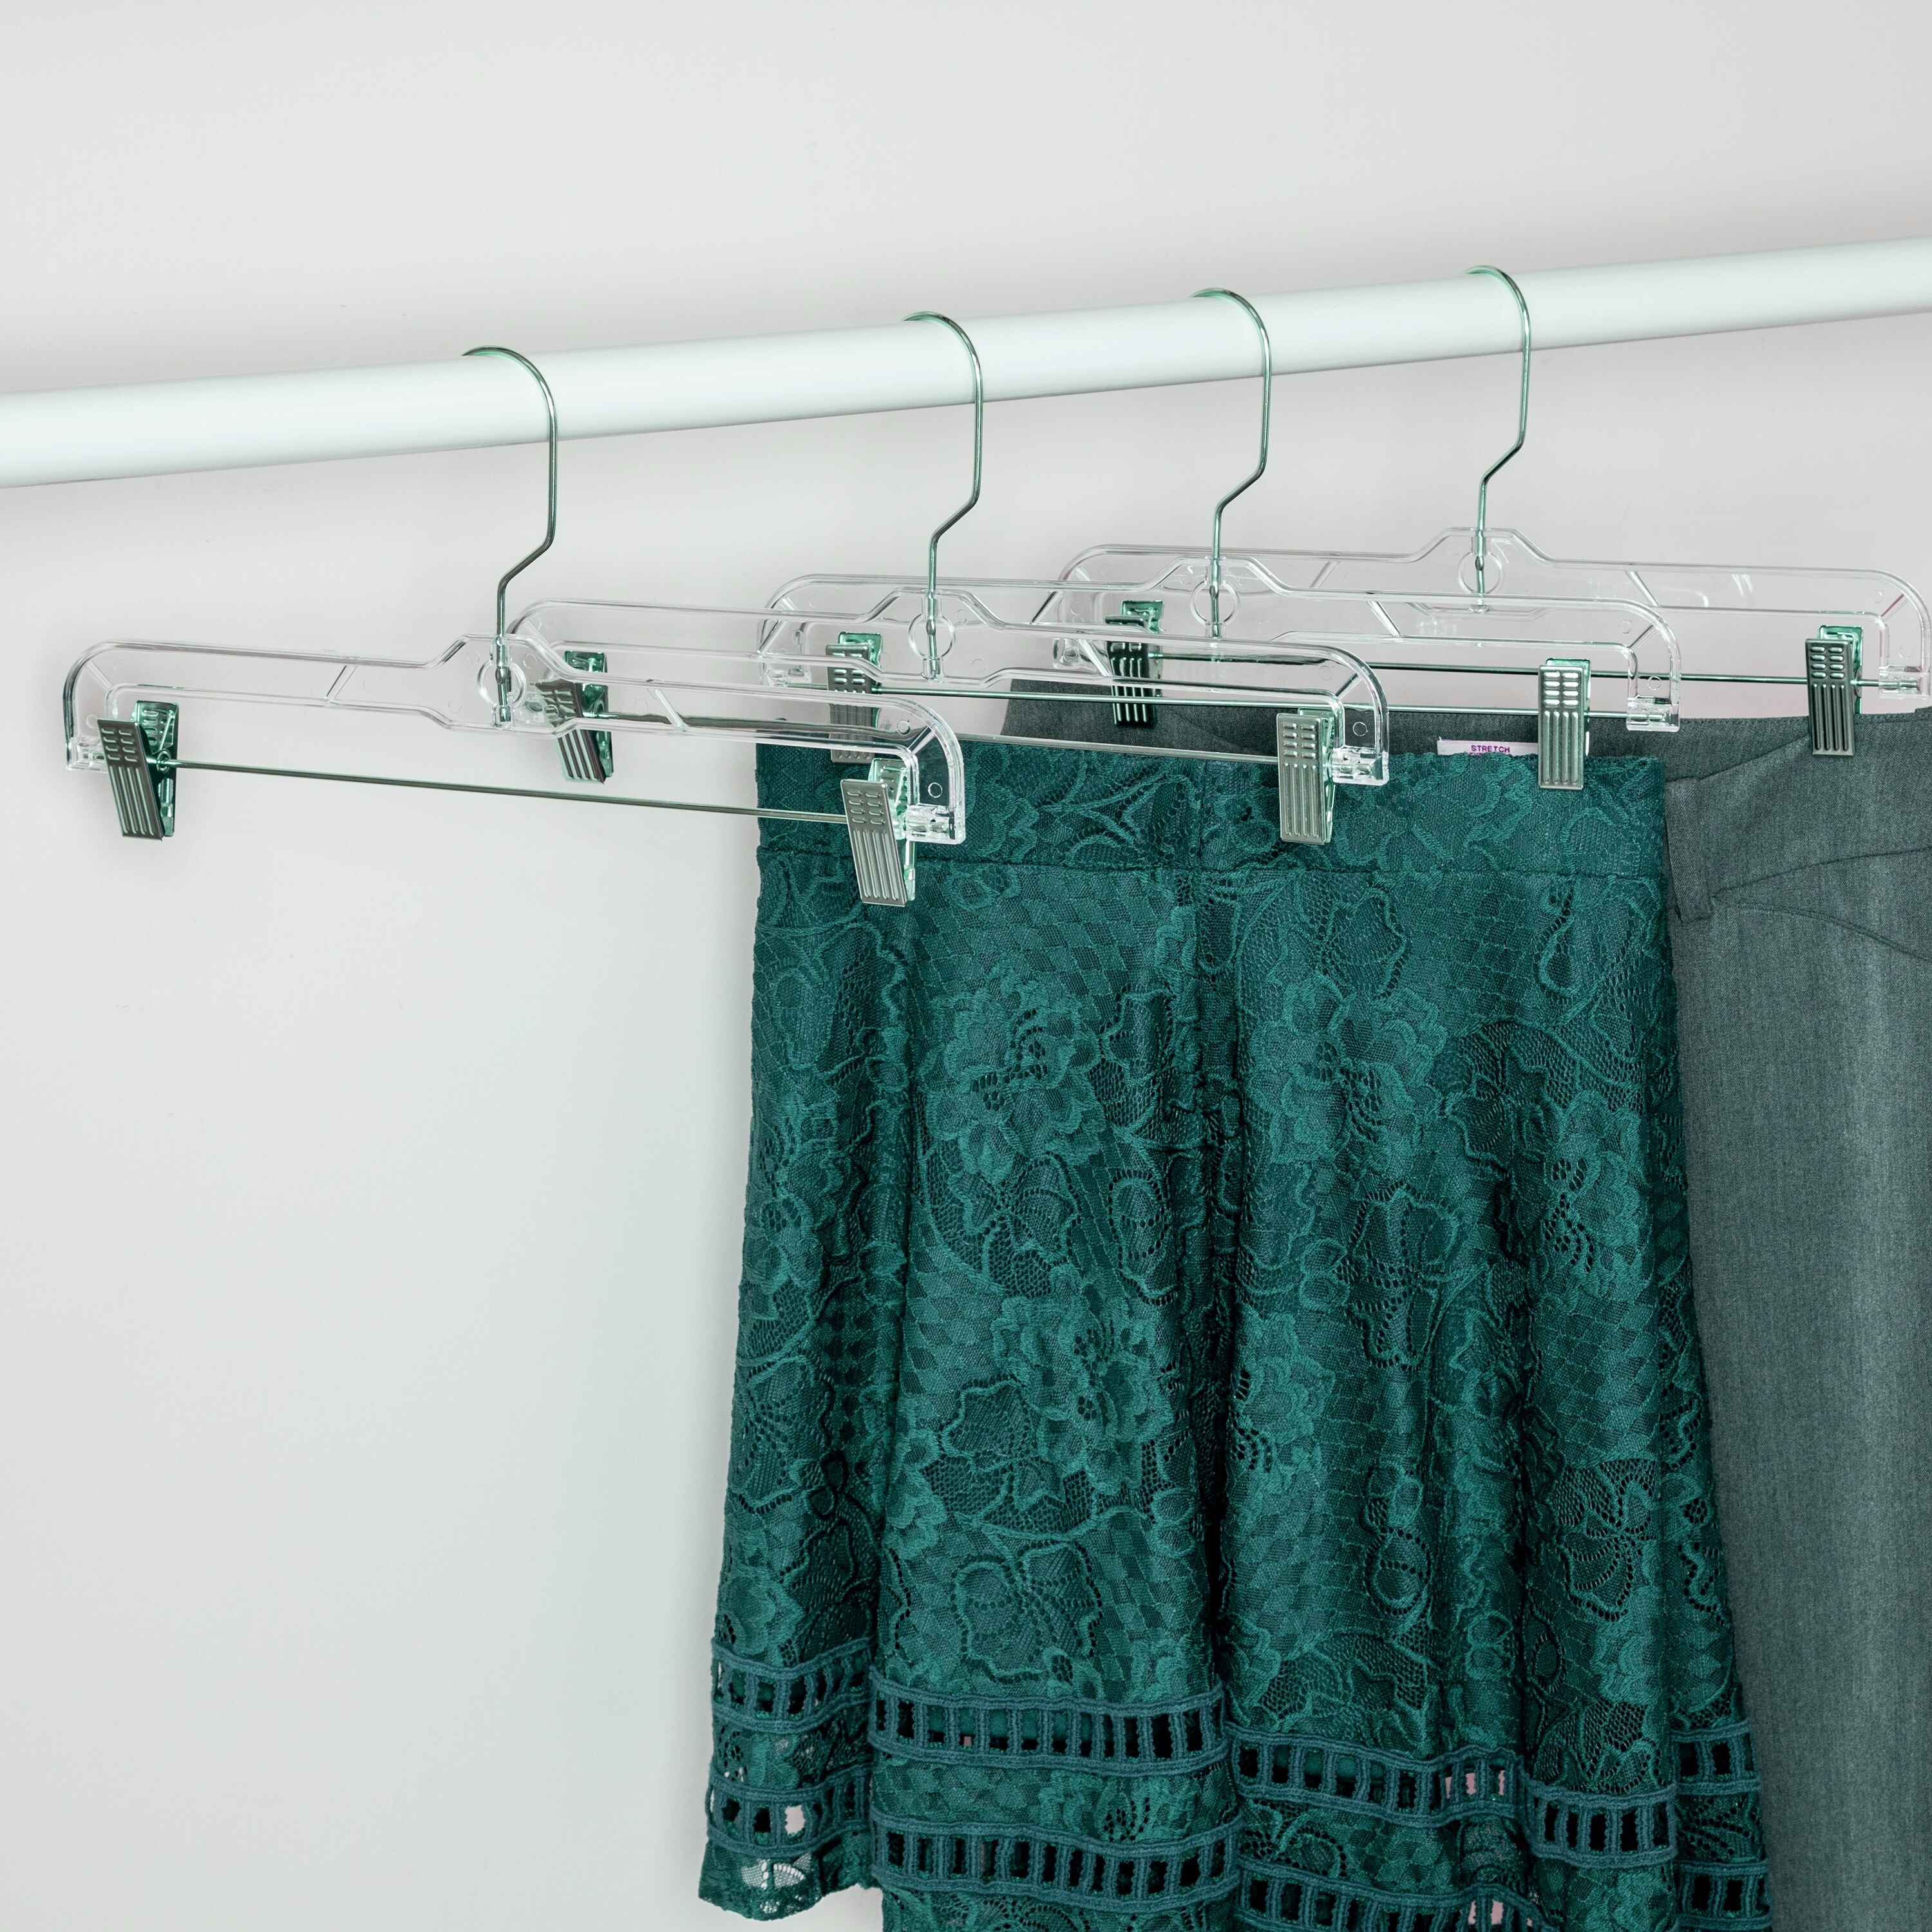 100 Clear 14 inch Skirt-Pant Hangers with Metal Clips